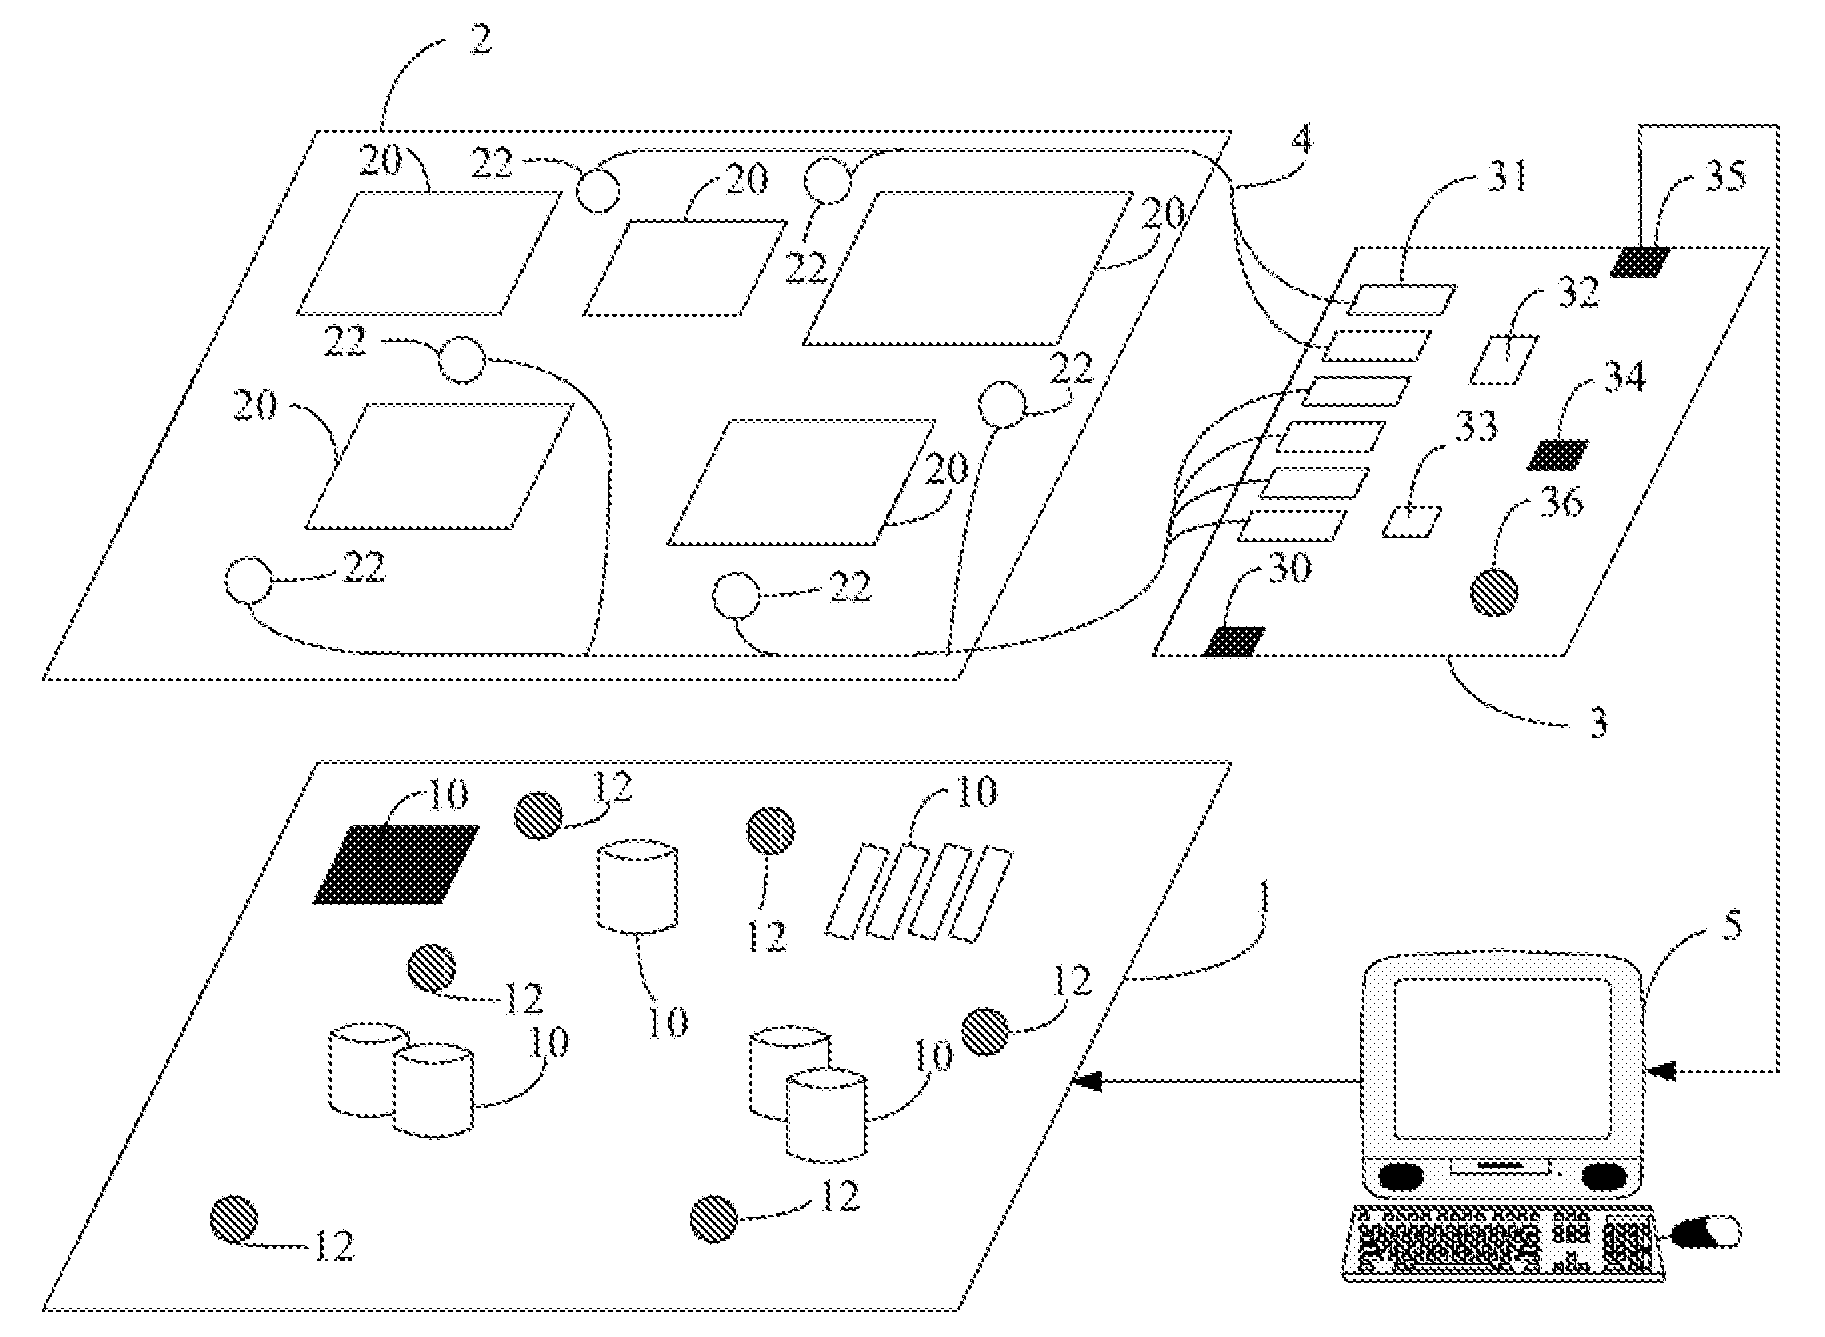 System and method for testing leds on a motherboard